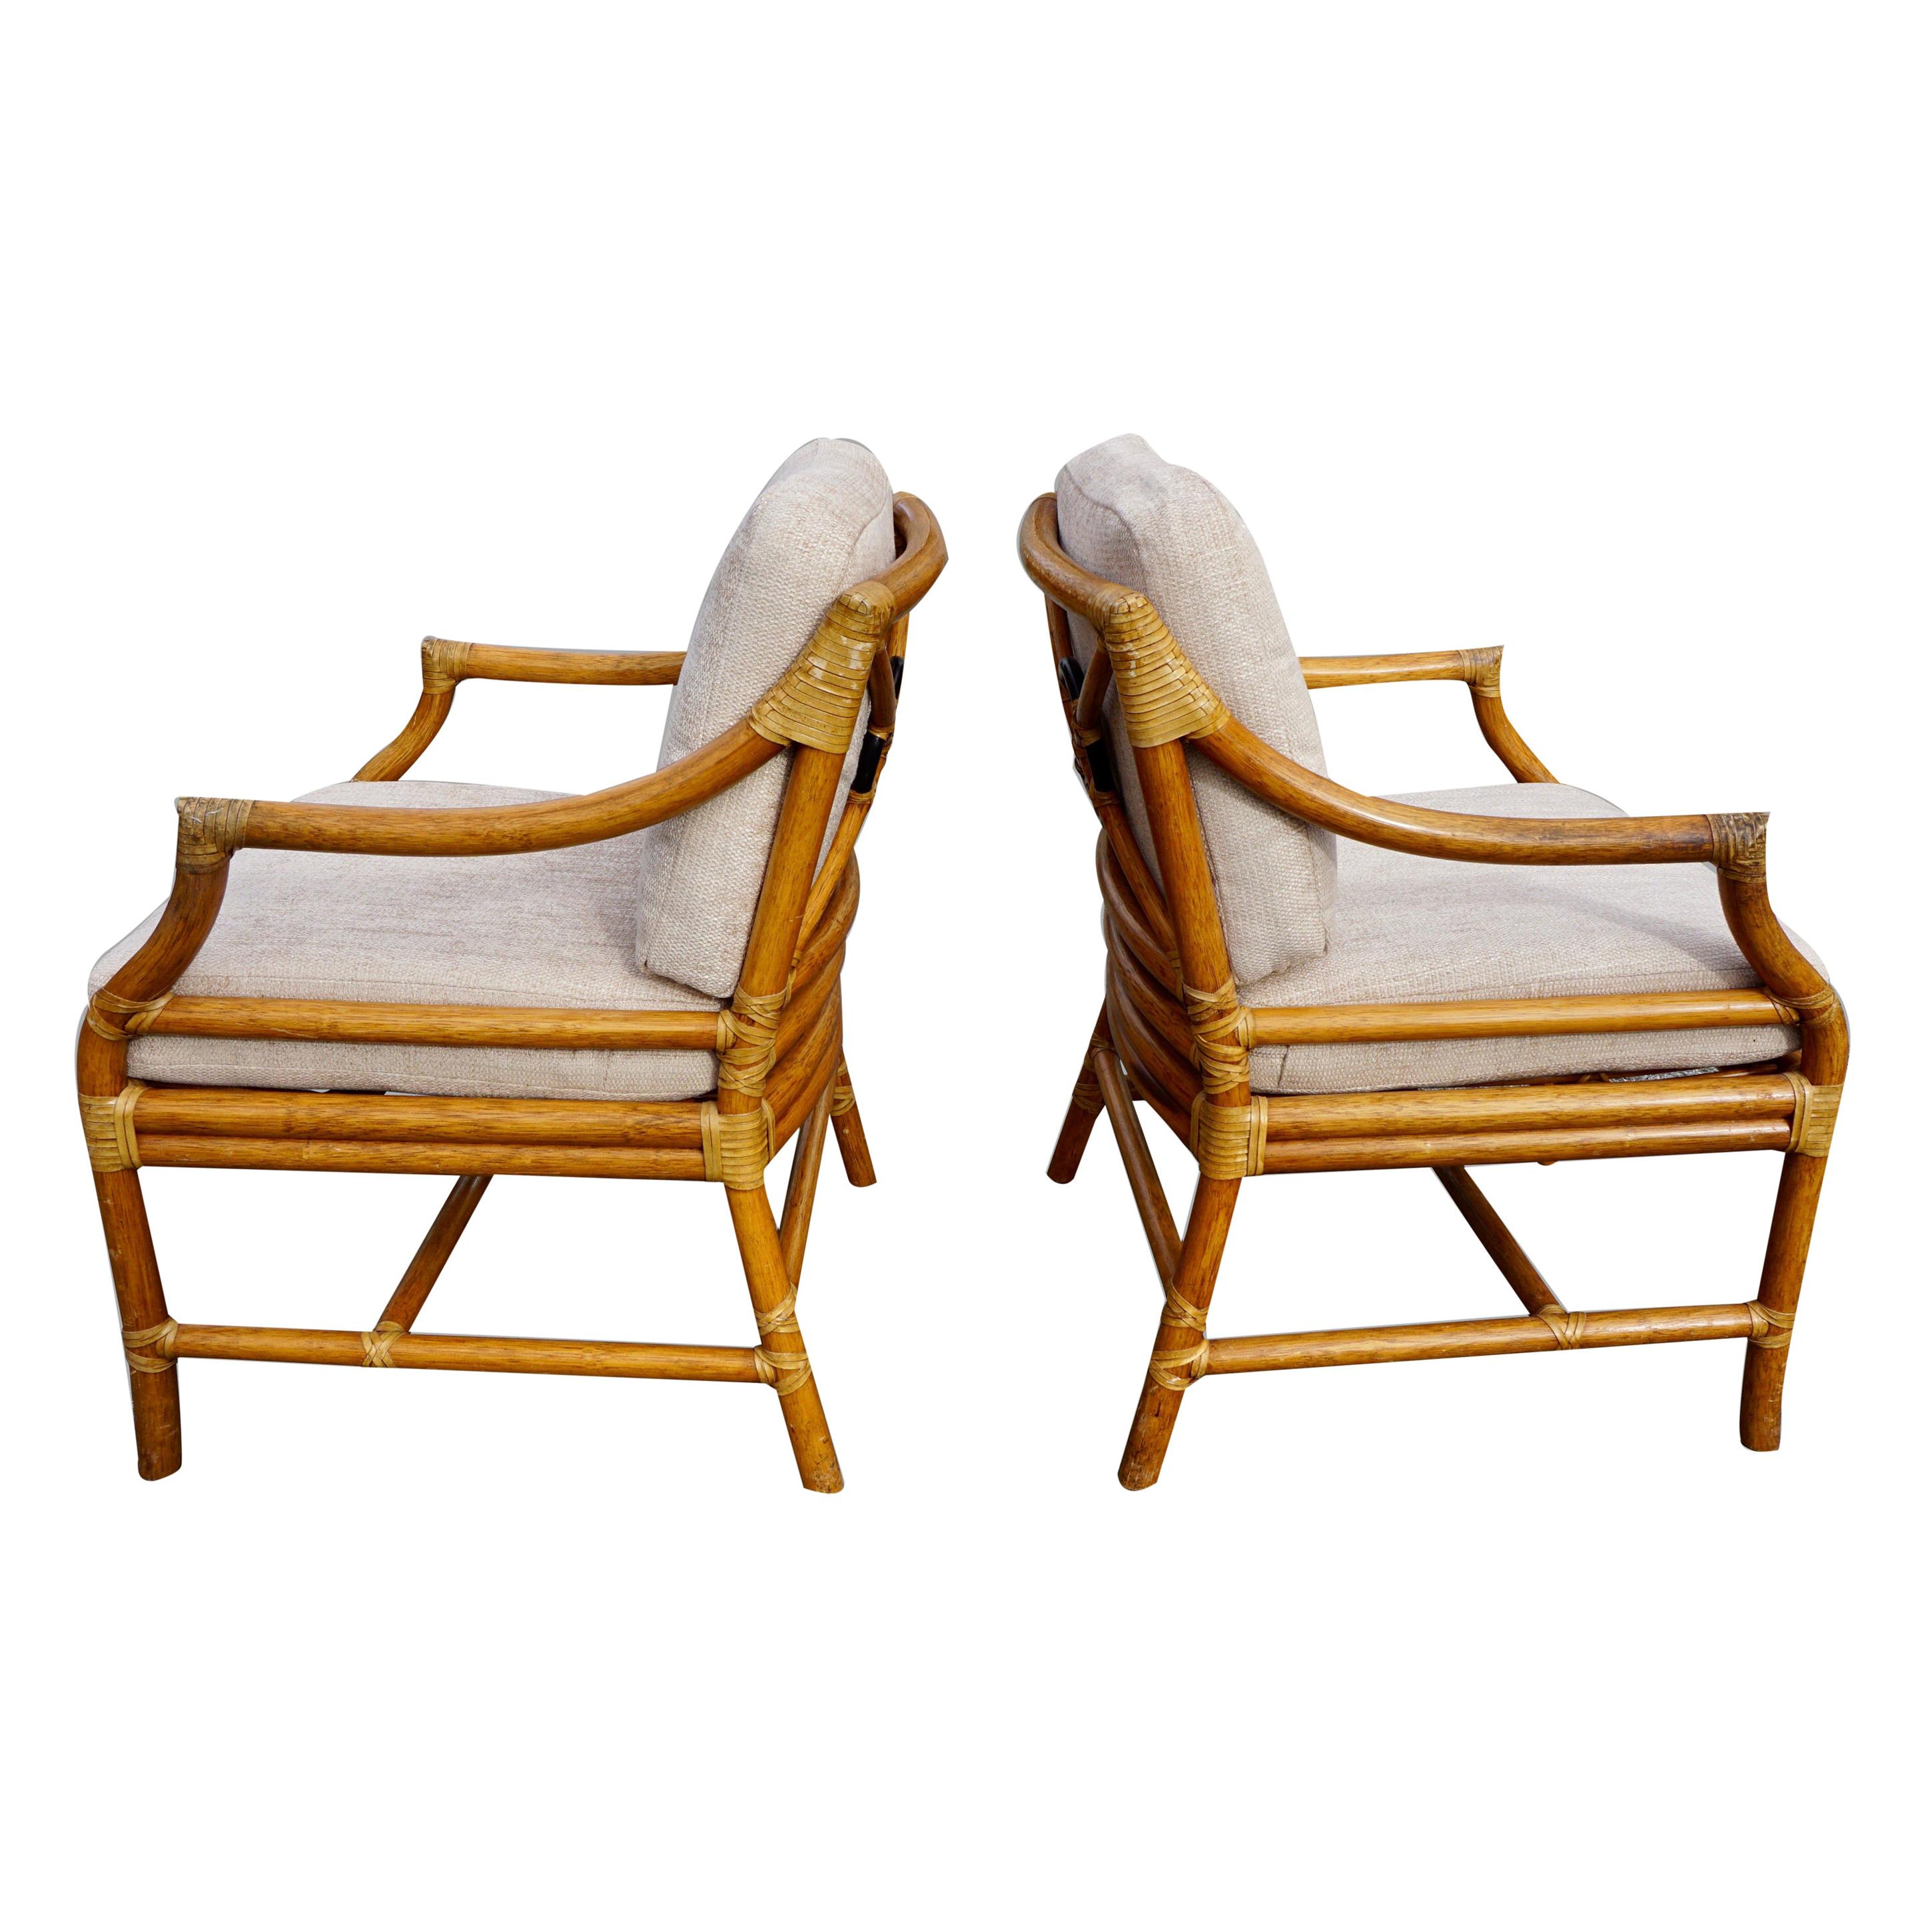 Pair of McGuire Organic Modern Rattan and Leather Upholstered Armchairs